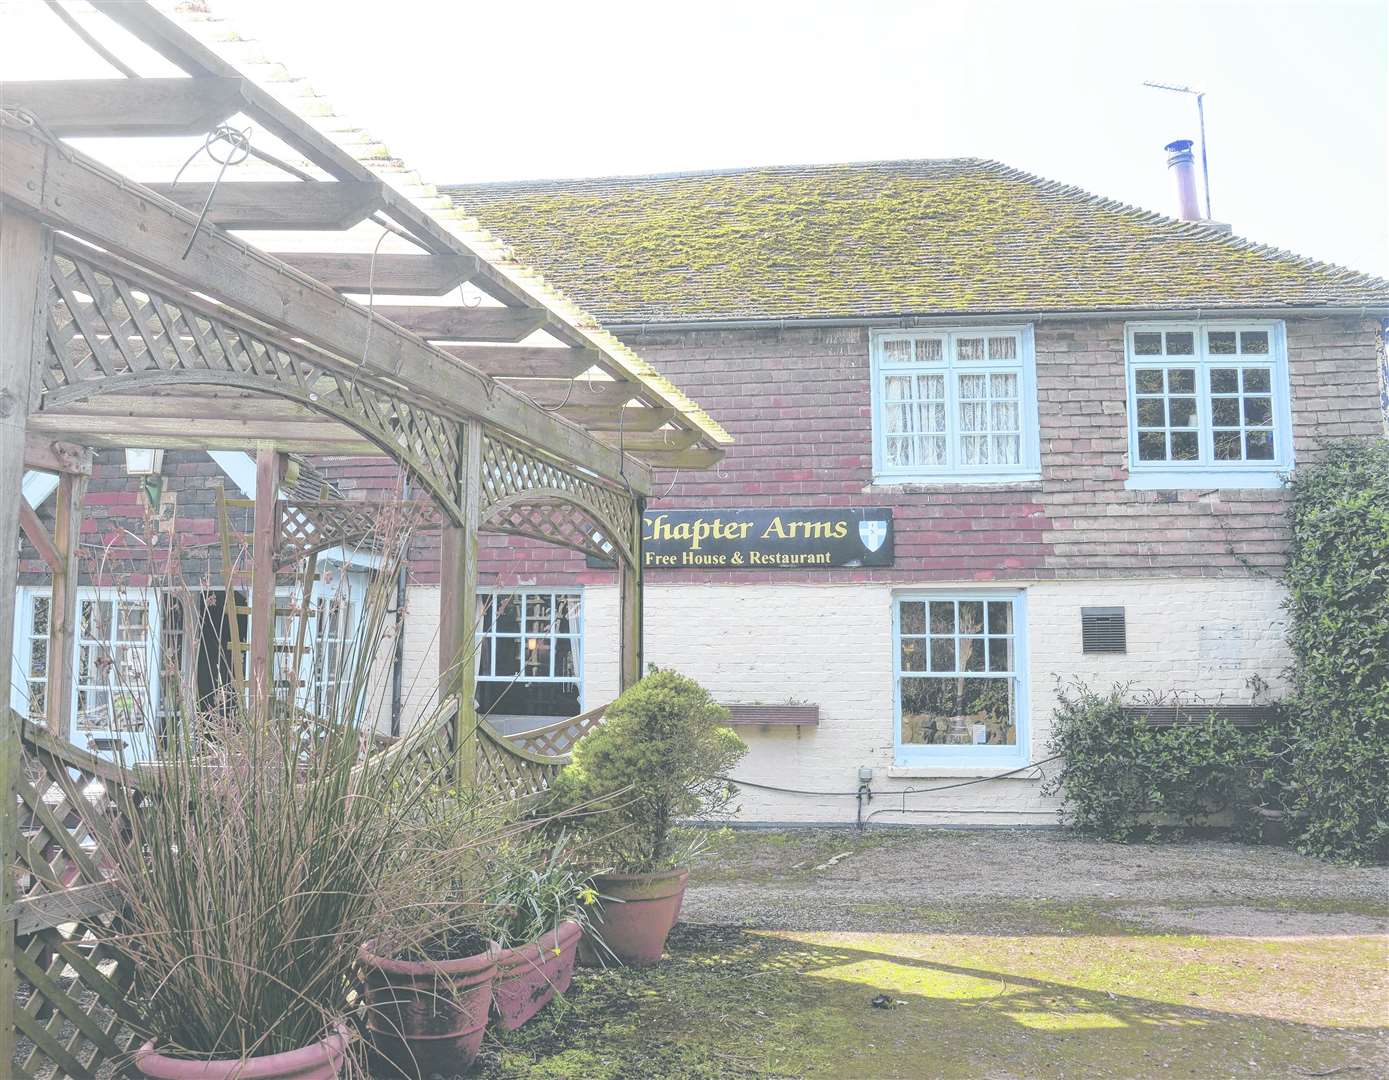 The Chapter Arms in Chartham Hatch, near Canterbury, has been shut for a number of years